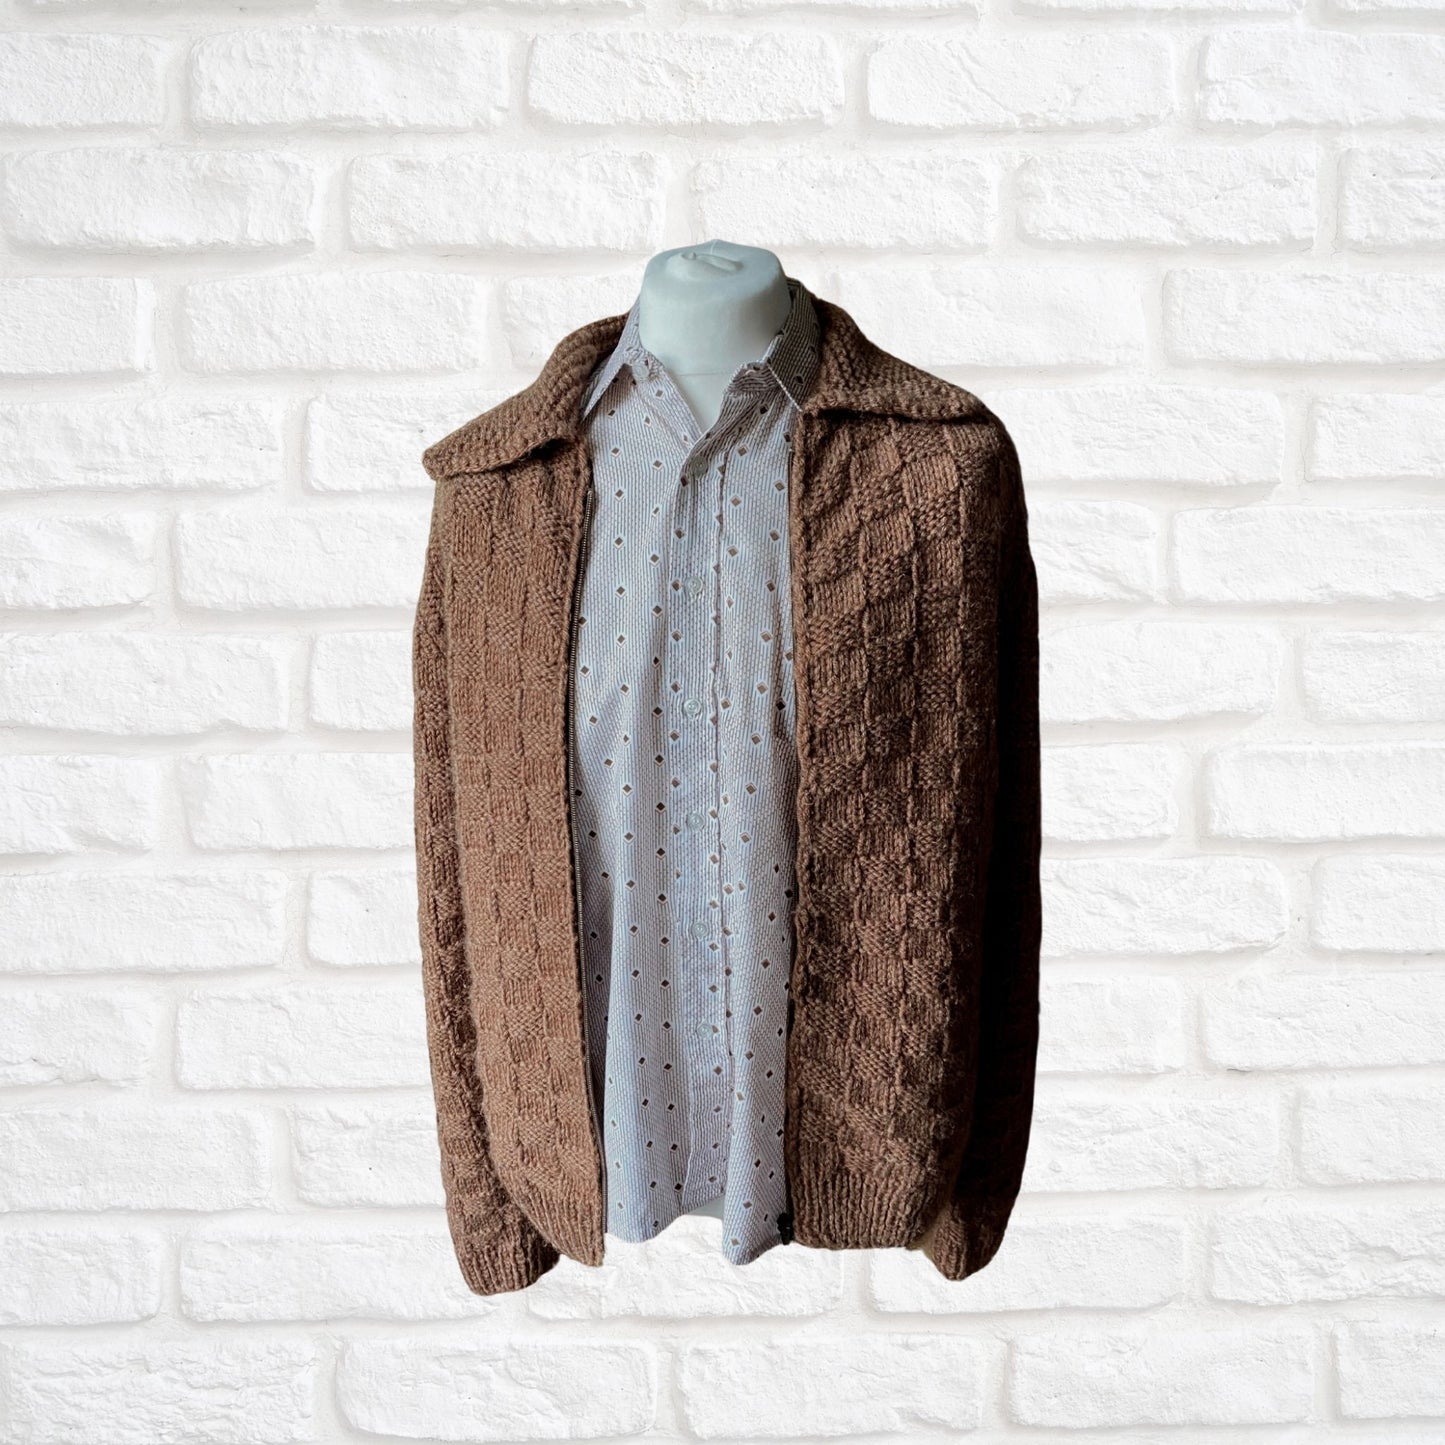 Vintage Brown Textured Knit Zip Up Cardigan: Cozy and Stylish  Sweater. UK size 10-16 (women) / Small to Medium  (men)